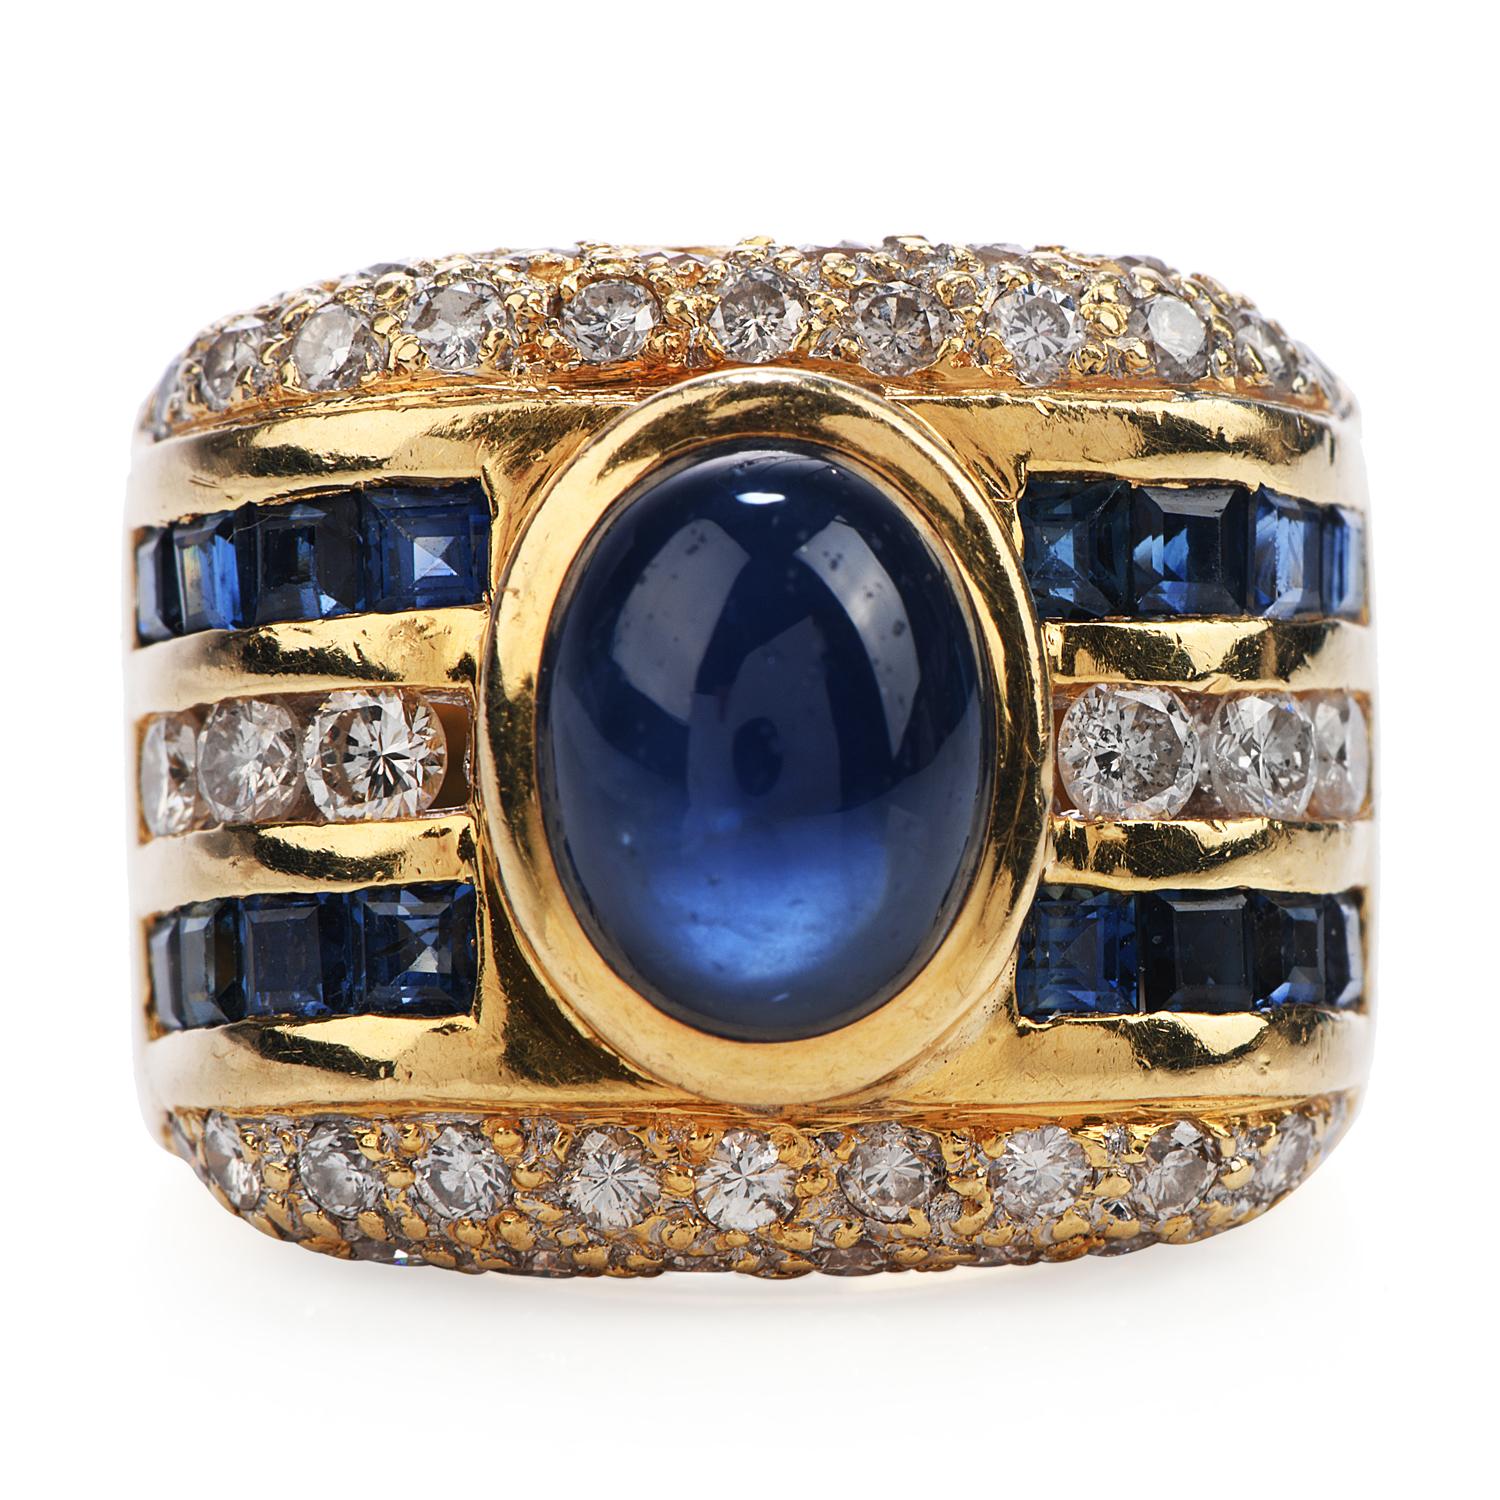 This 1980s Estate Piece, is the Perfect Unisex Gift! Crafted in Solid 18K Yellow Gold.

The Wide Design of this band, can be suitable for a Woman statement piece or for a Man's Pinky Ring!

The Center is a Cabochon Oval Cut, Bezel Set, Blue Sapphire